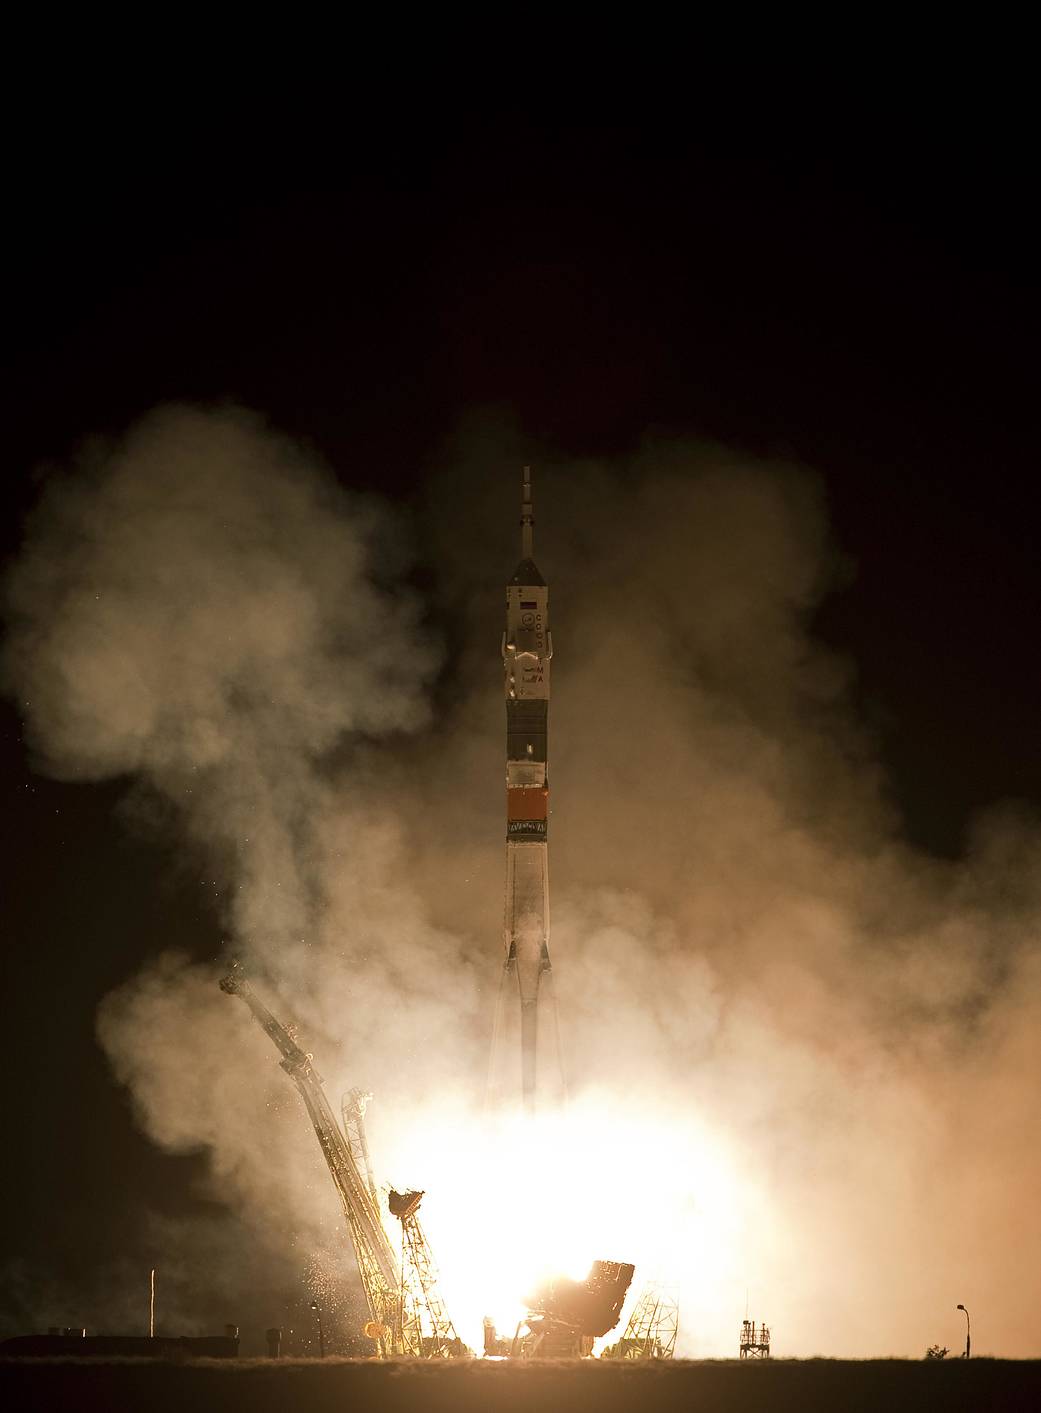 Expedition 24 Heads to the Station